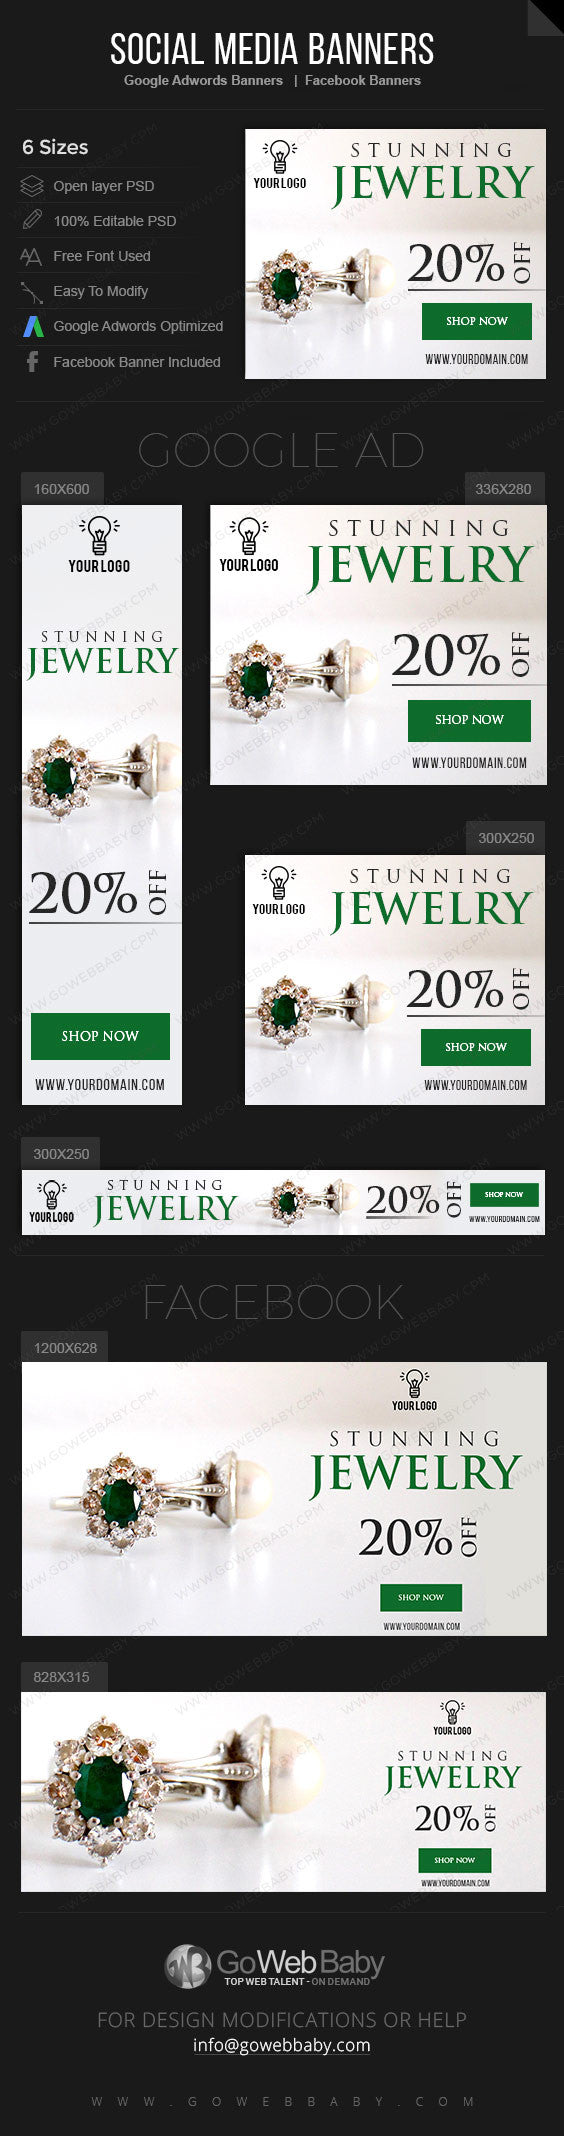 Google Adwords Display Banner with Facebook banners -Stunning Jewelry Store Website Marketing - GoWebBaby.Com